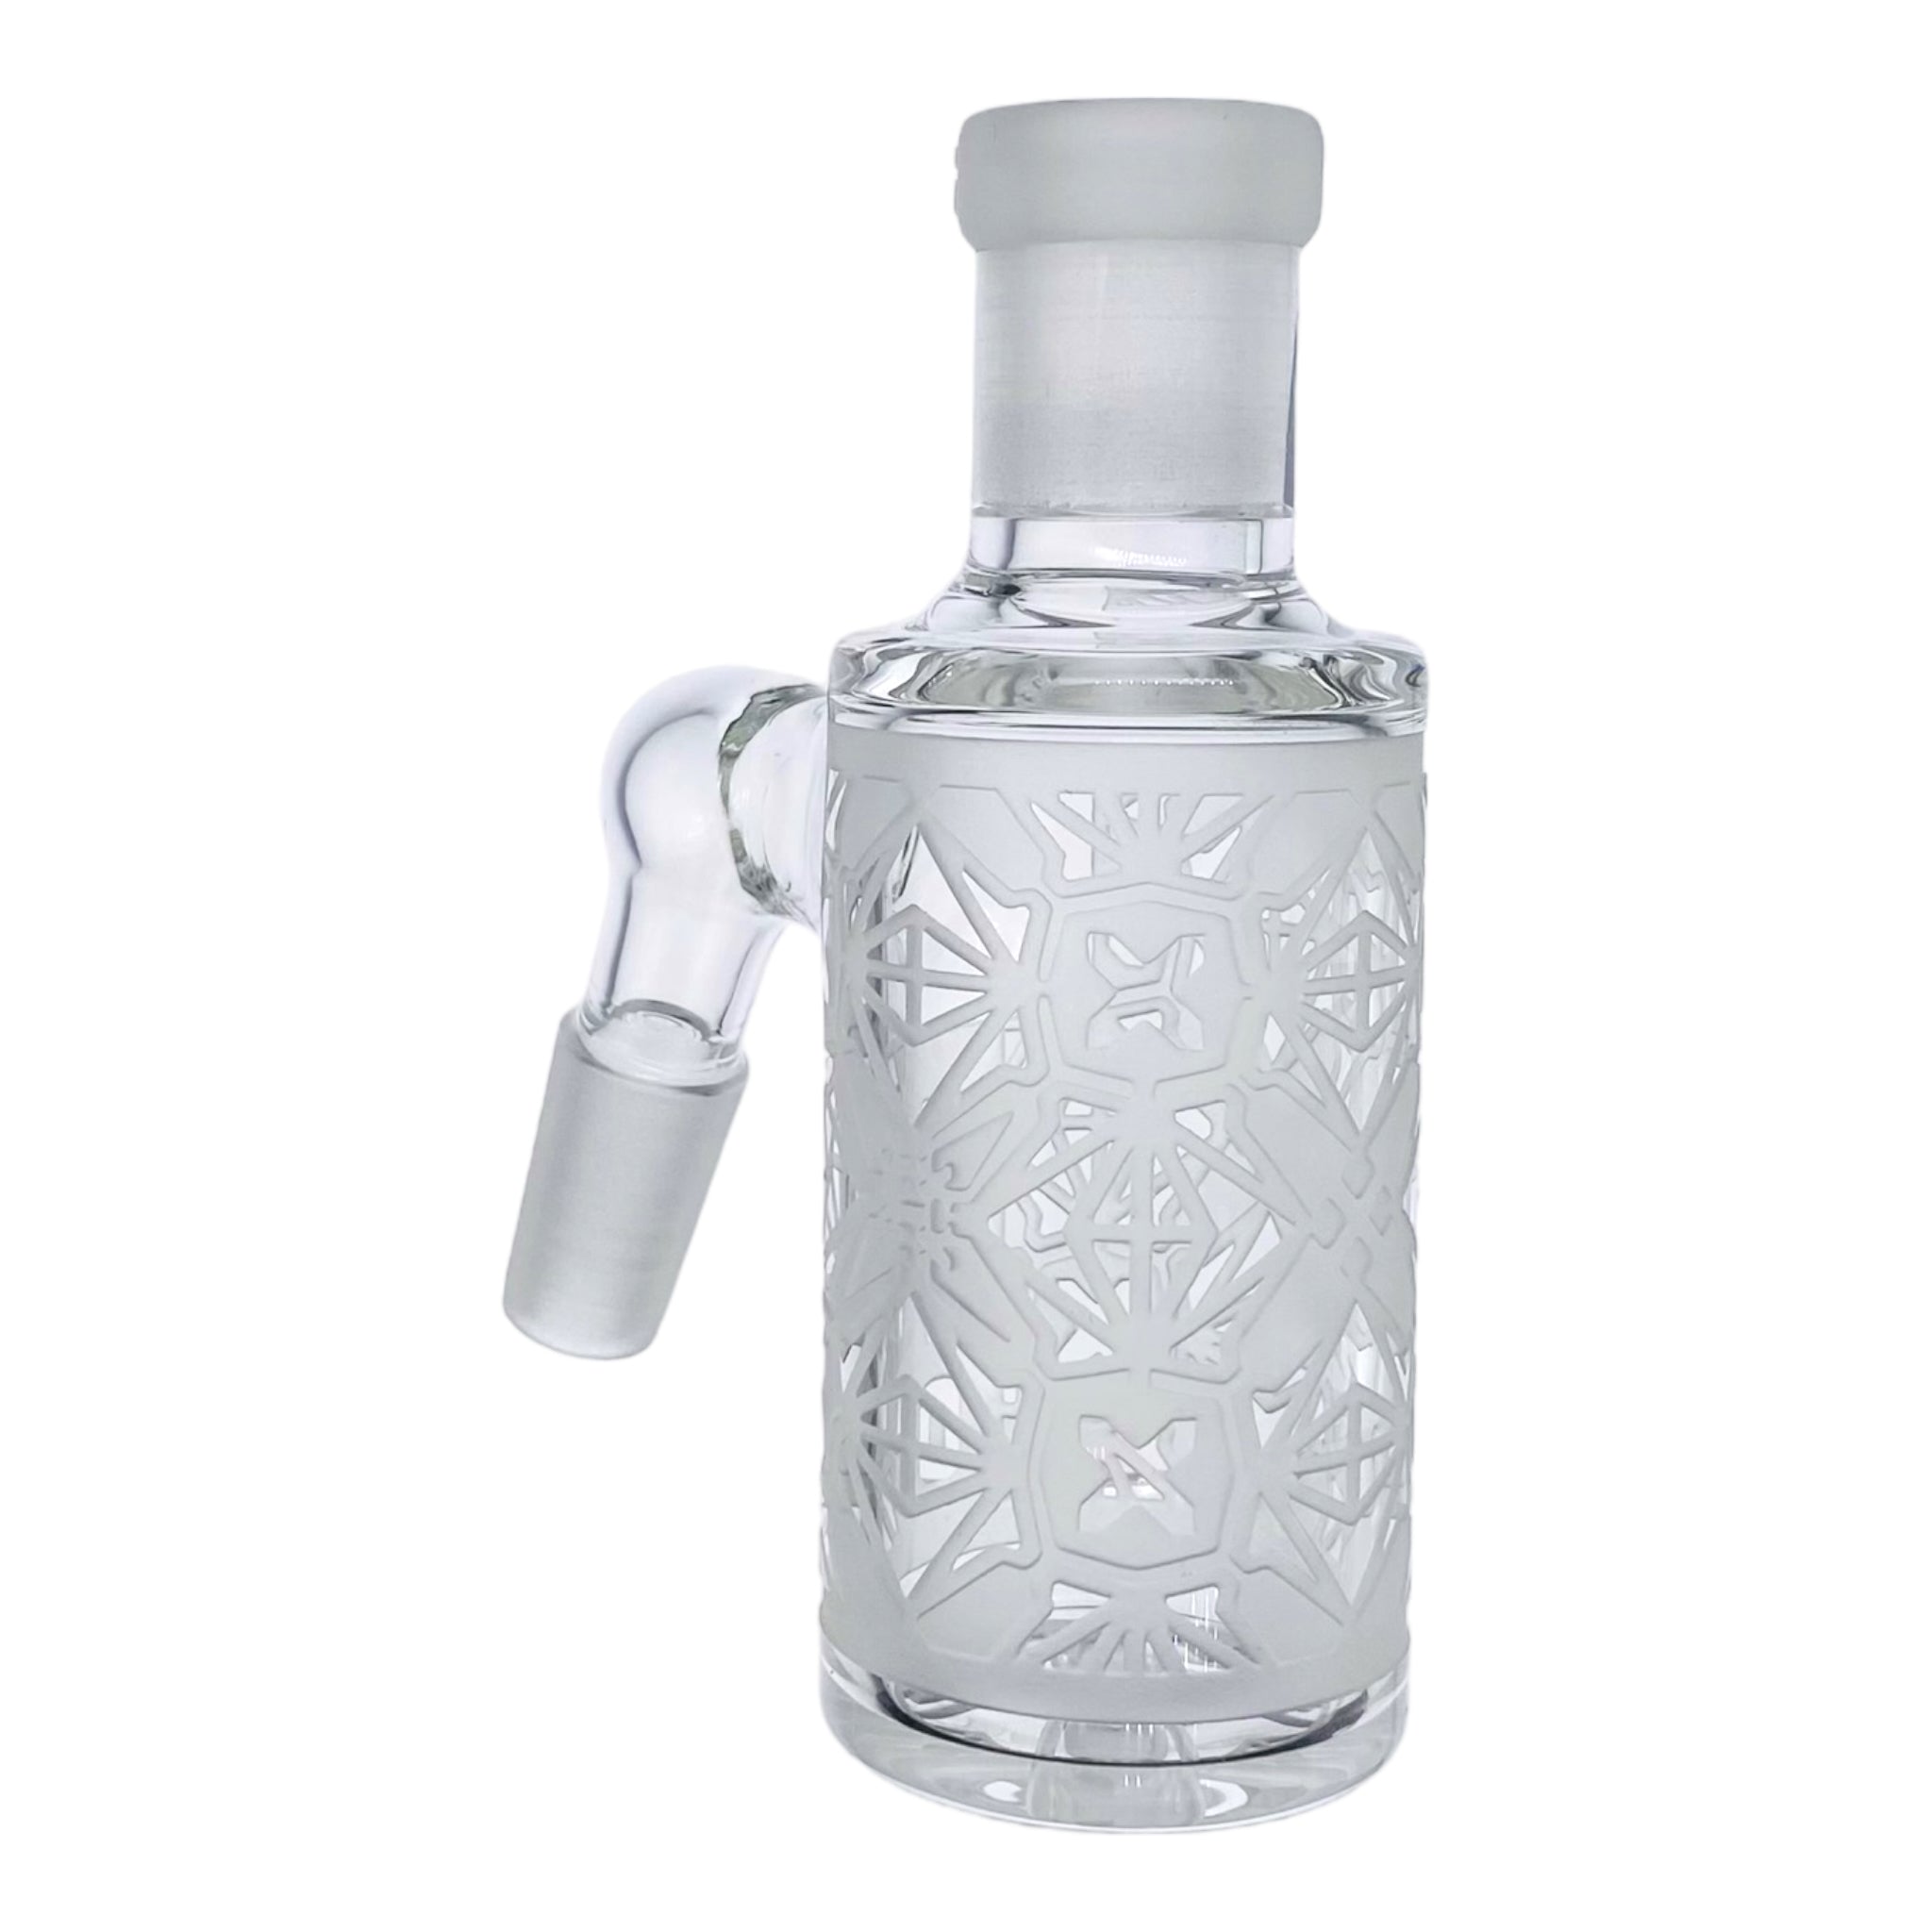 Milkyway Glass - X-Morphic Dry Ashcatcher for bongs -14mm 45 Degree Male Clear